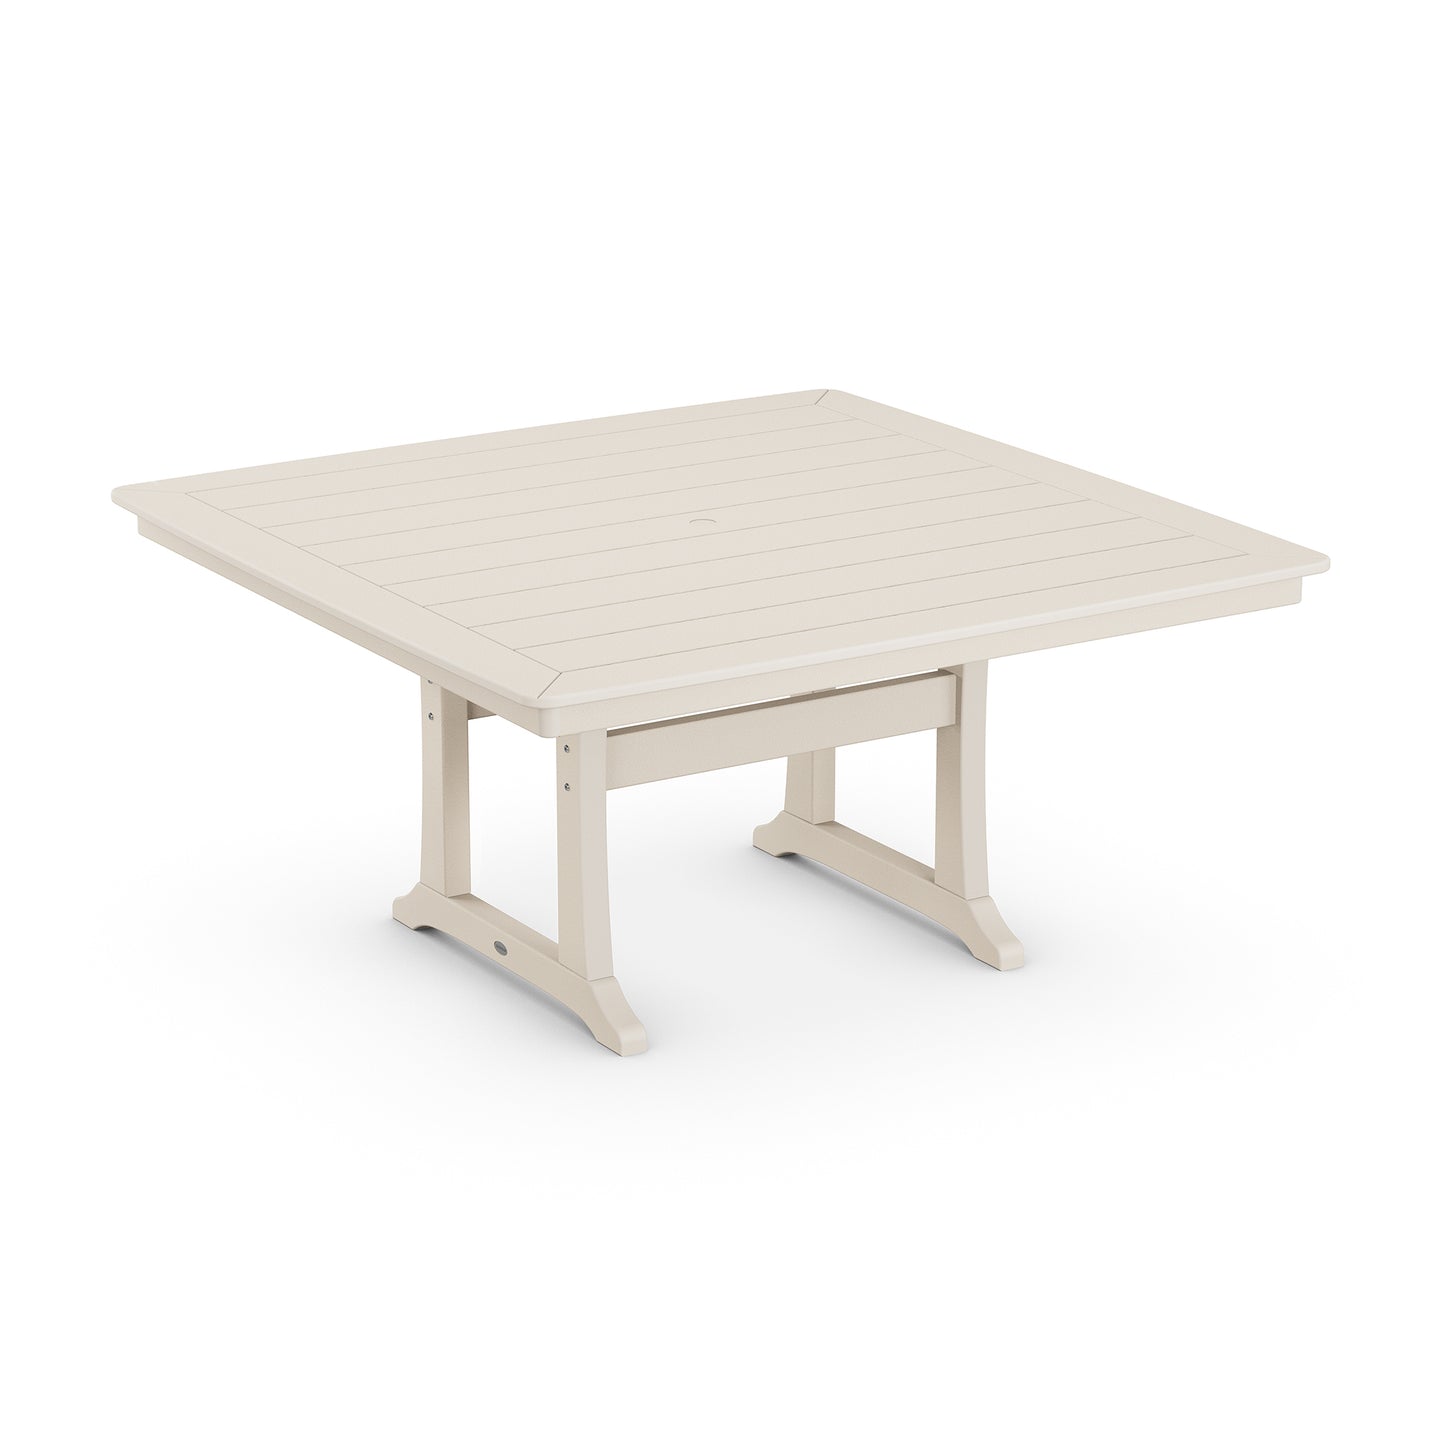 A POLYWOOD Nautical Trestle 59" Dining Table, off-white square with a slatted top and sturdy legs, isolated on a white background.